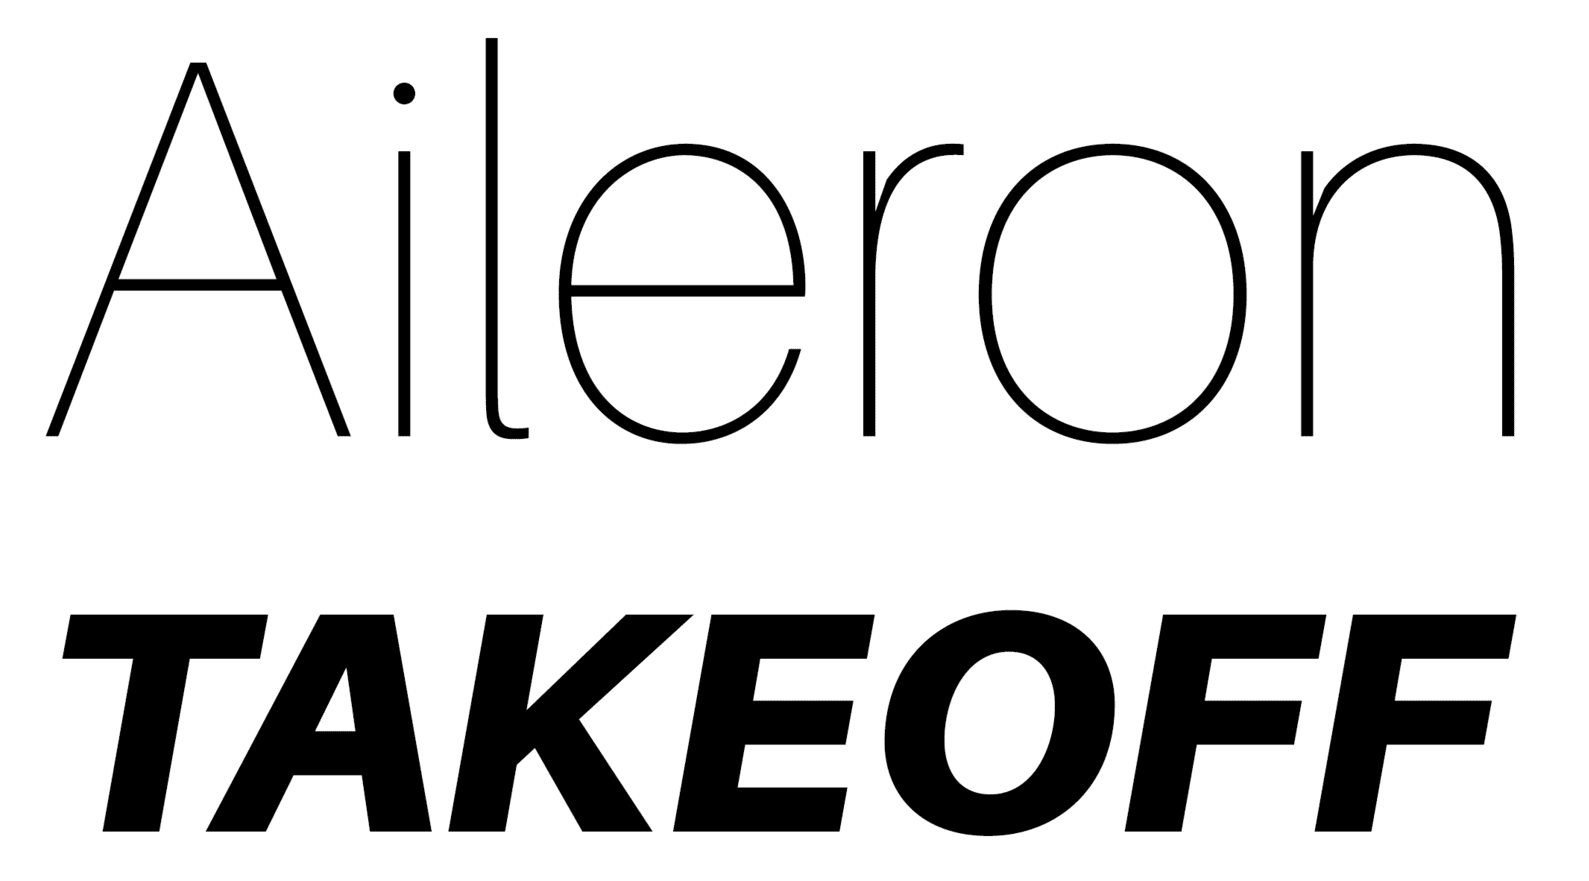 Example of the Aileron font.